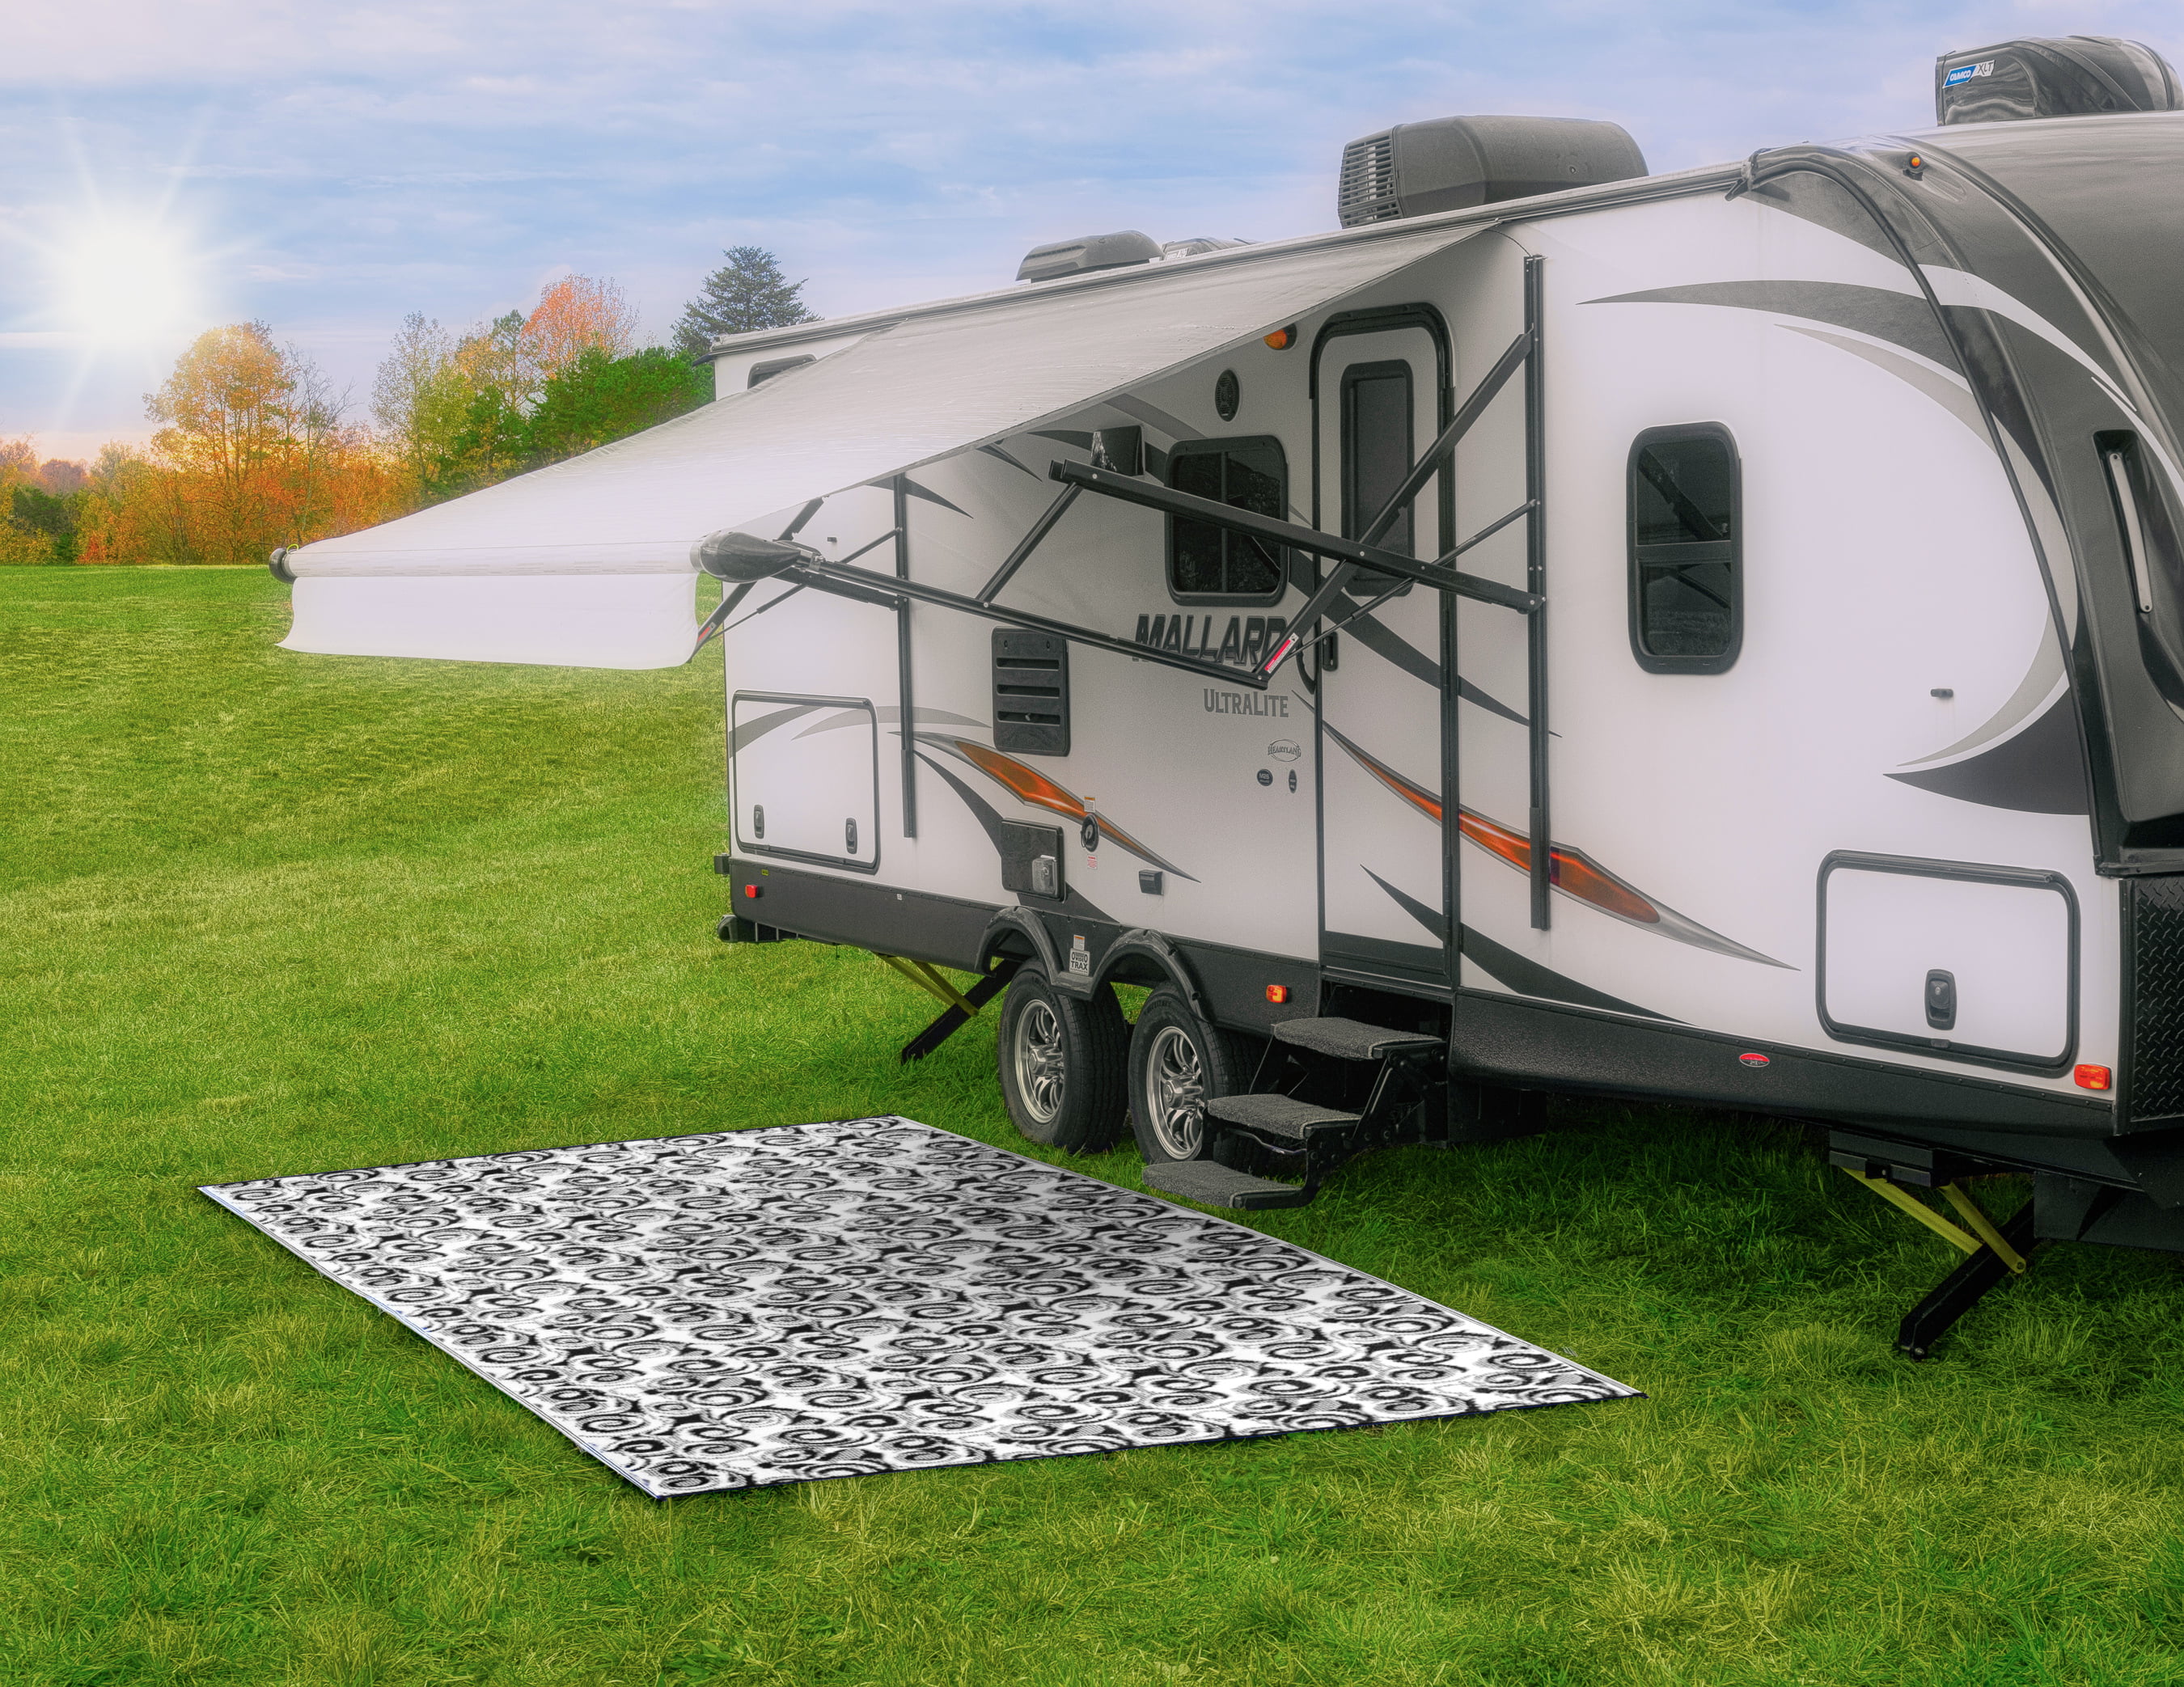 Camco Reversible Camper/RV Awning and Outdoor Mat, 8-feet by 16-feet